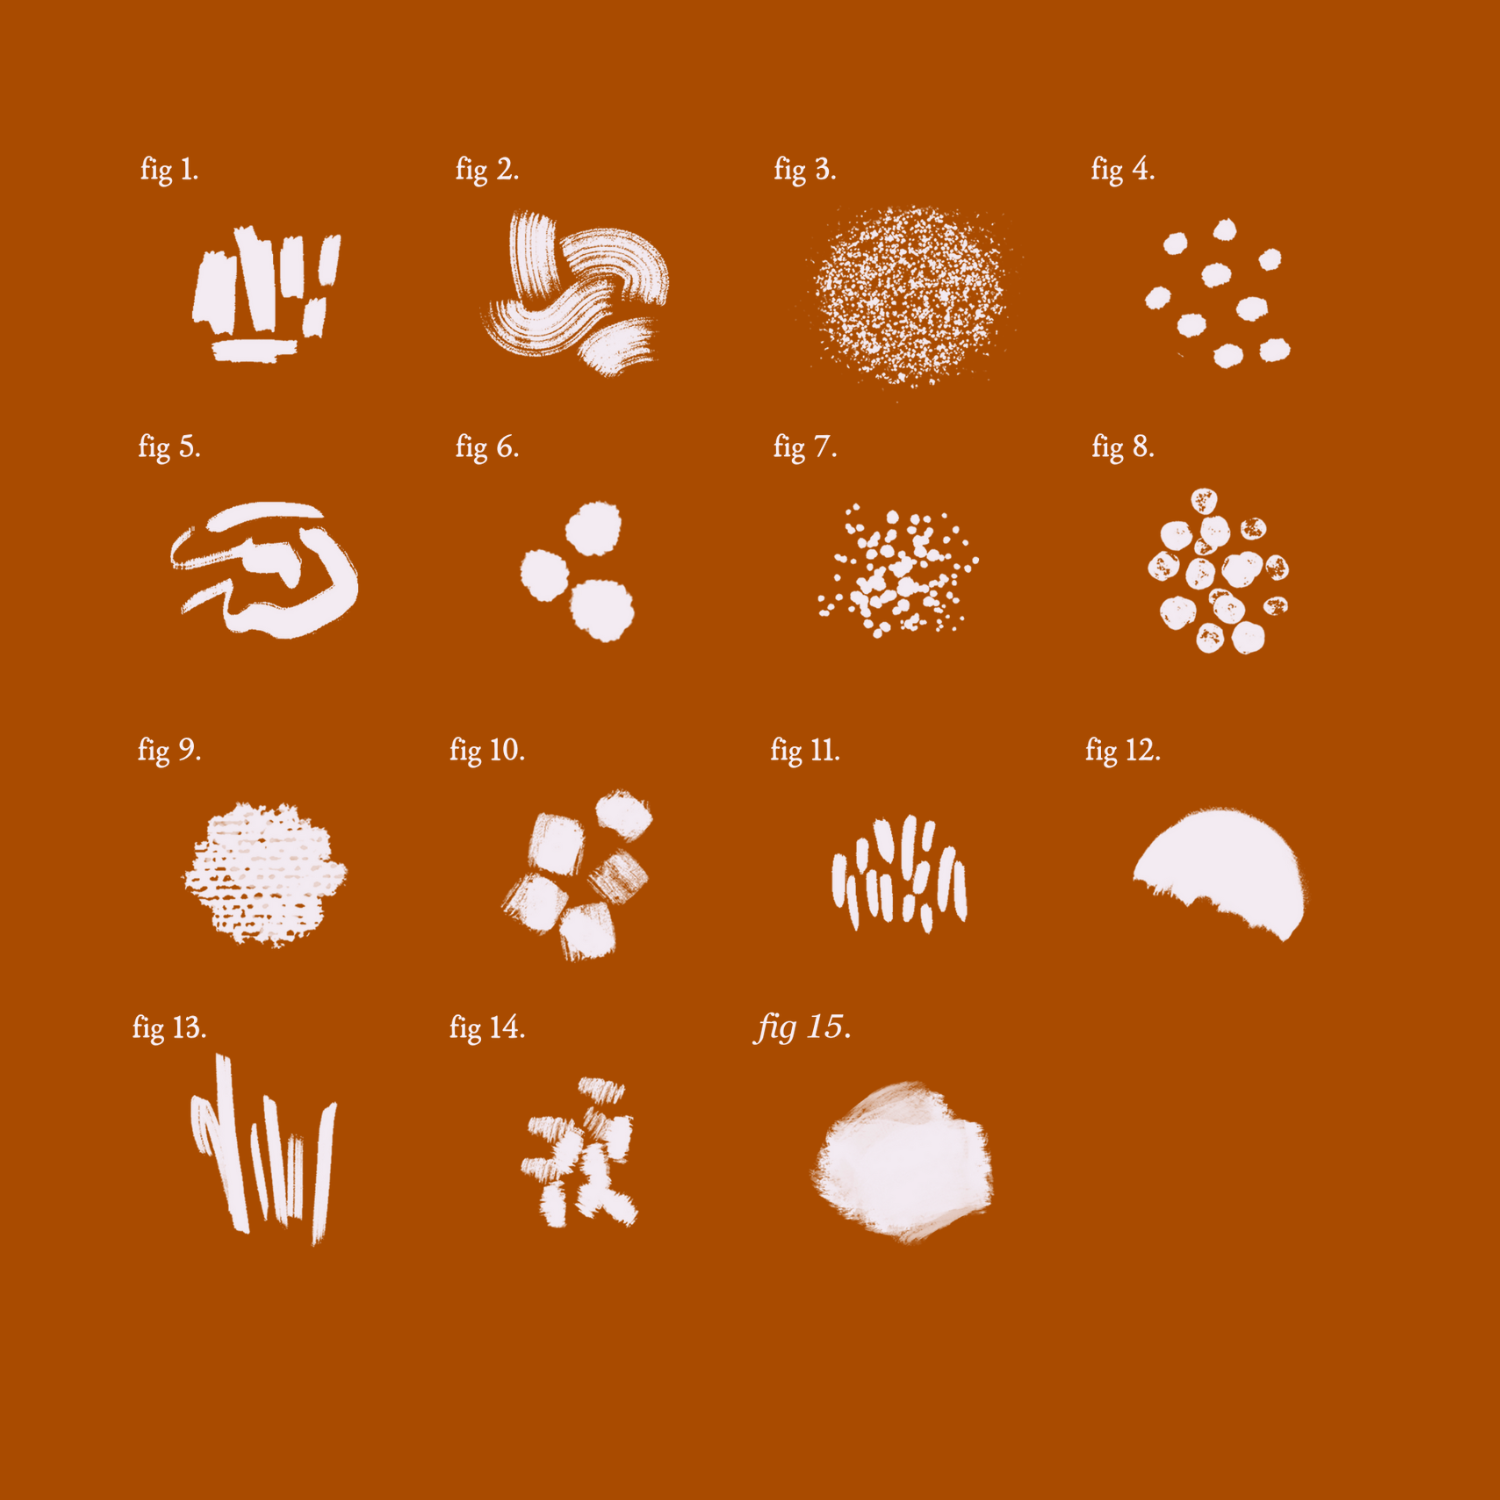 Illustration of microbz 15 strains of microbes